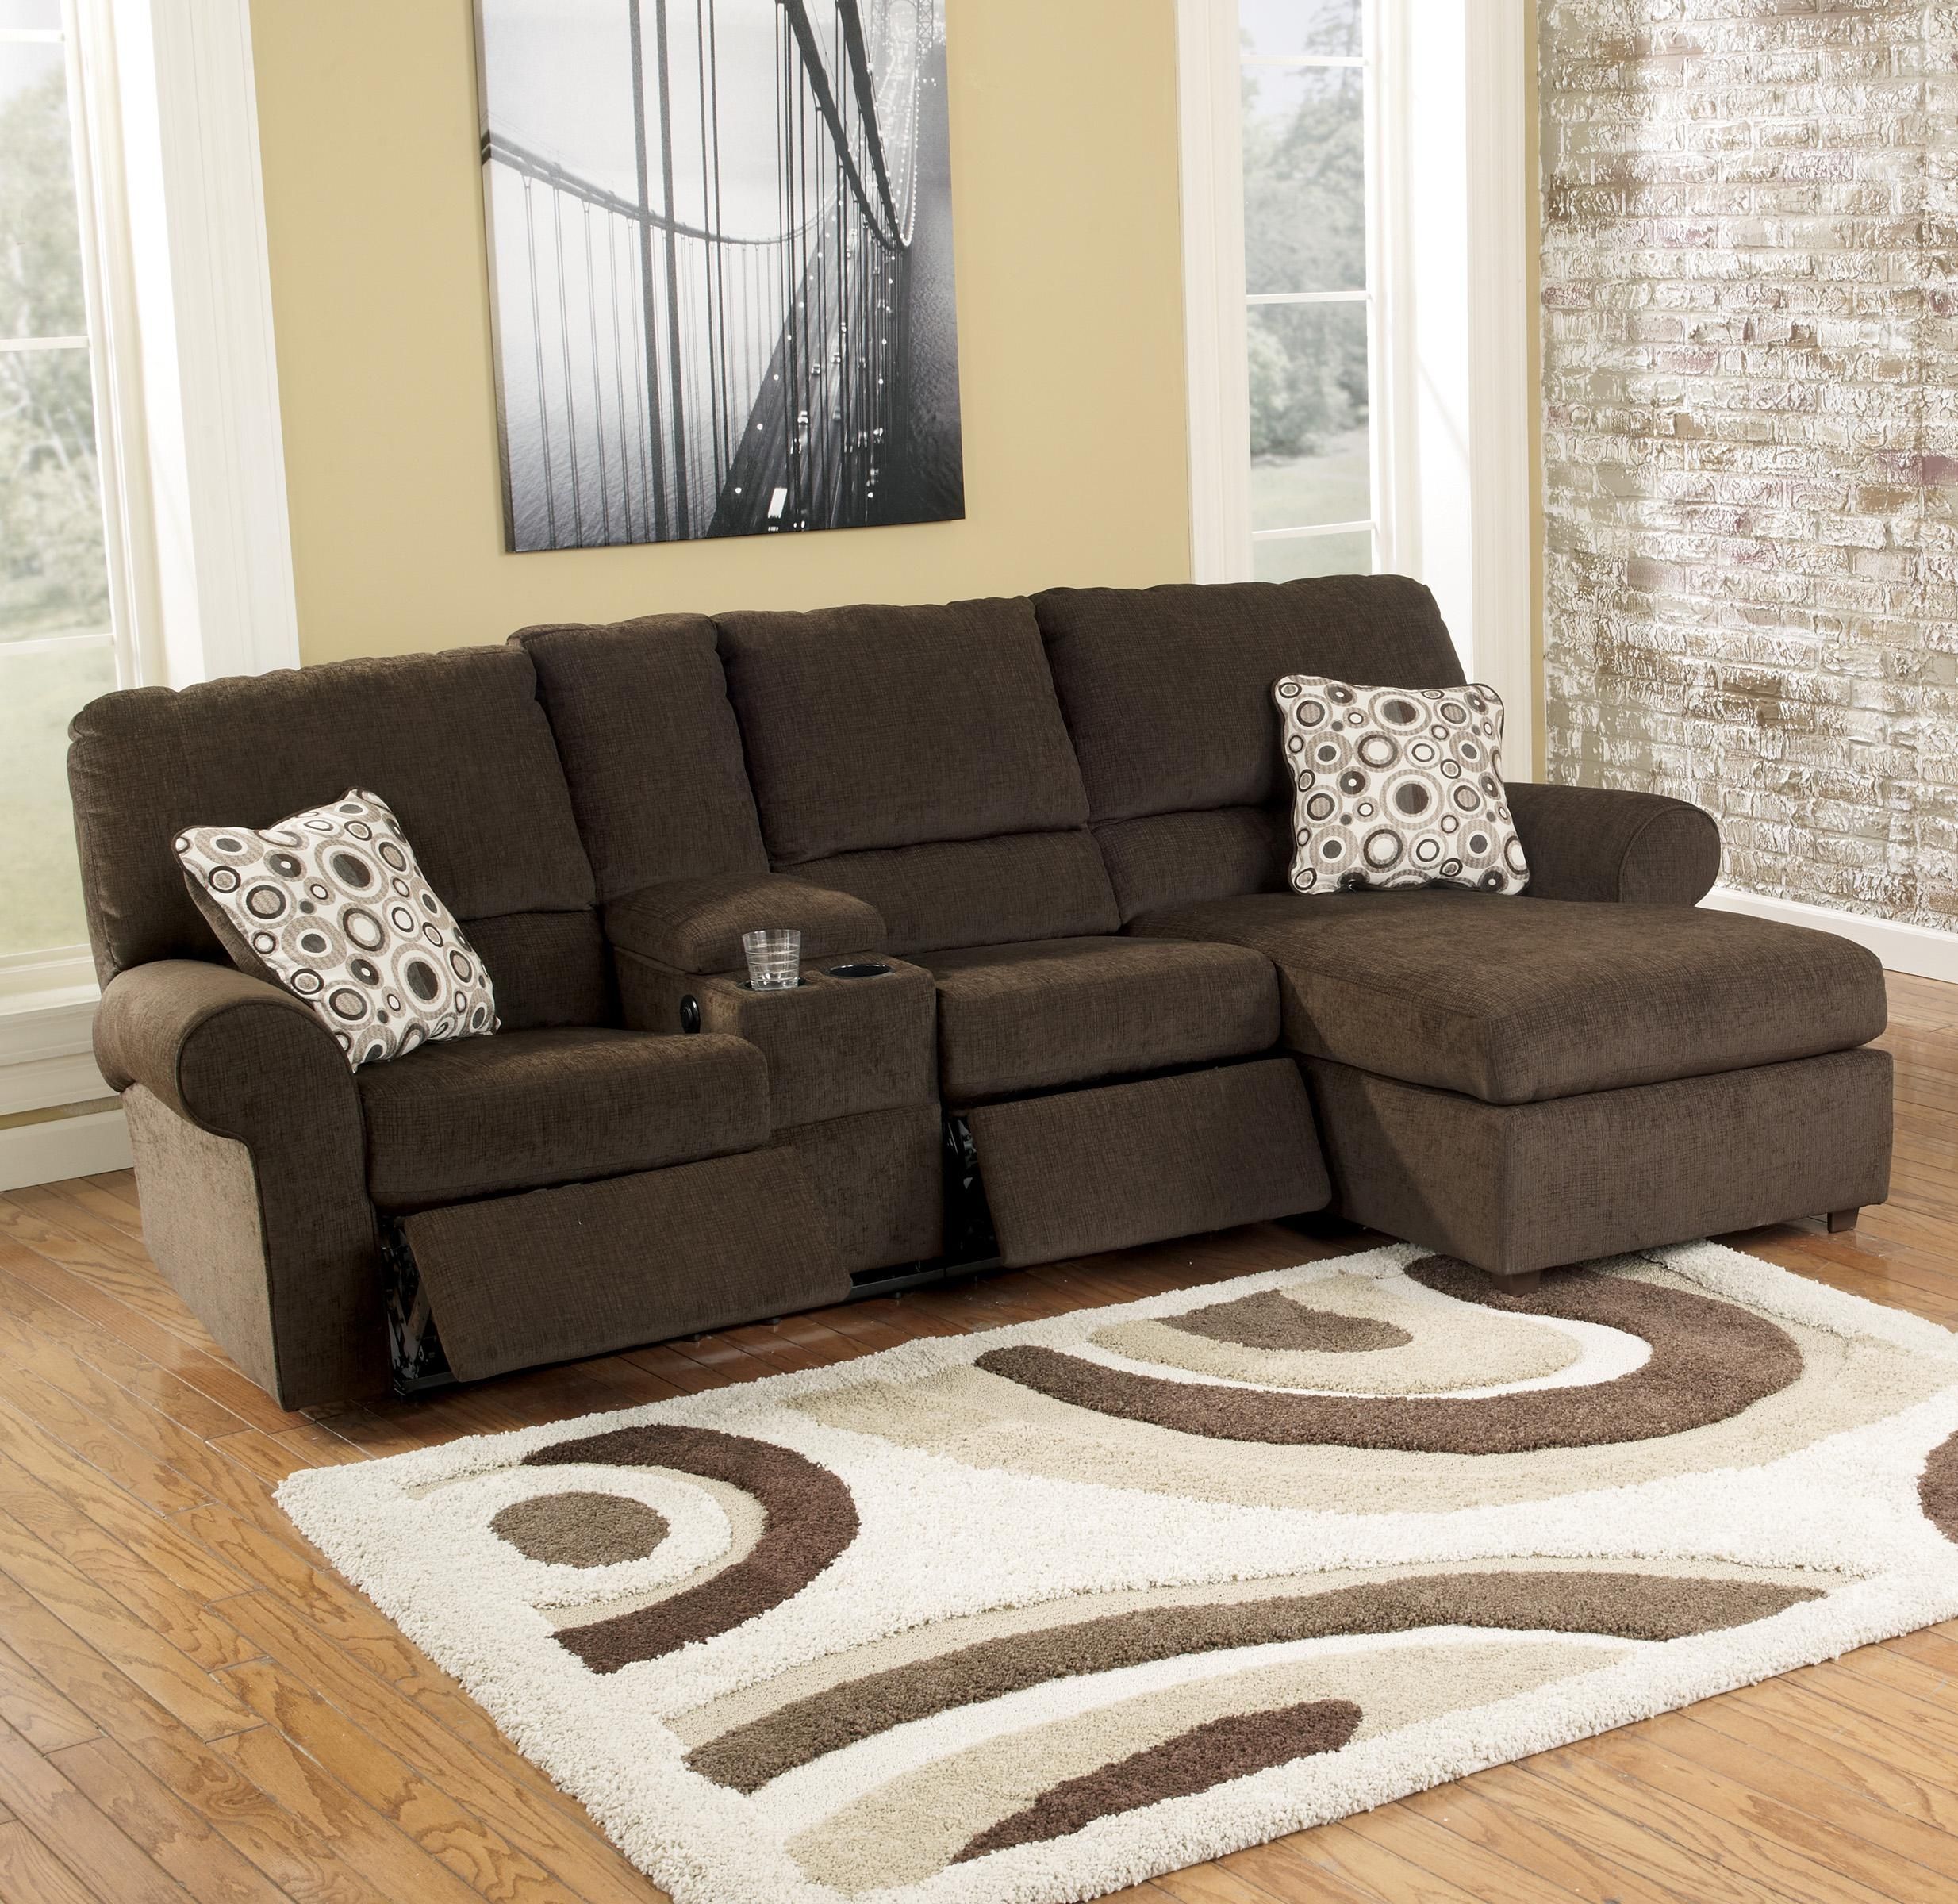 Glamorous Sectional Sofas With Recliners And Chaise 45 On Backless Intended For Backless Chaise Sofa (View 8 of 12)